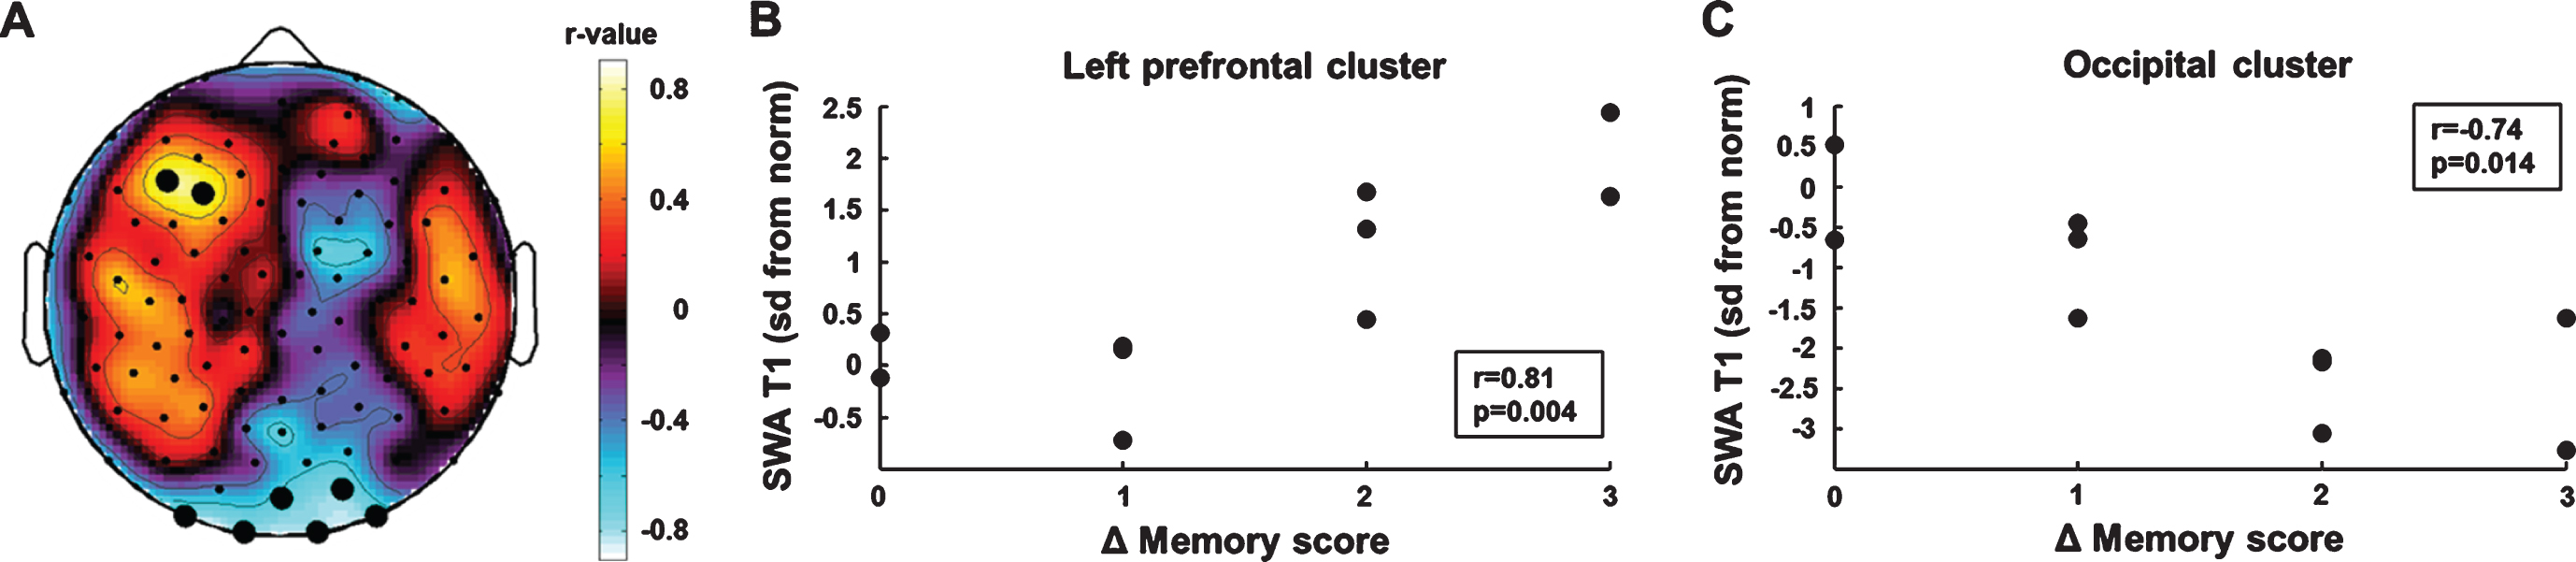 Correlation analyses of initial SWA and memory improvement. (A) Topographic distribution of correlation coefficients. Black dots indicate significant p-values (p < 0.05). (B) Higher SWA in the left frontal cluster was positively associated with memory improvement. (C) Higher SWA in the occipital cluster was negatively associated with memory improvement.